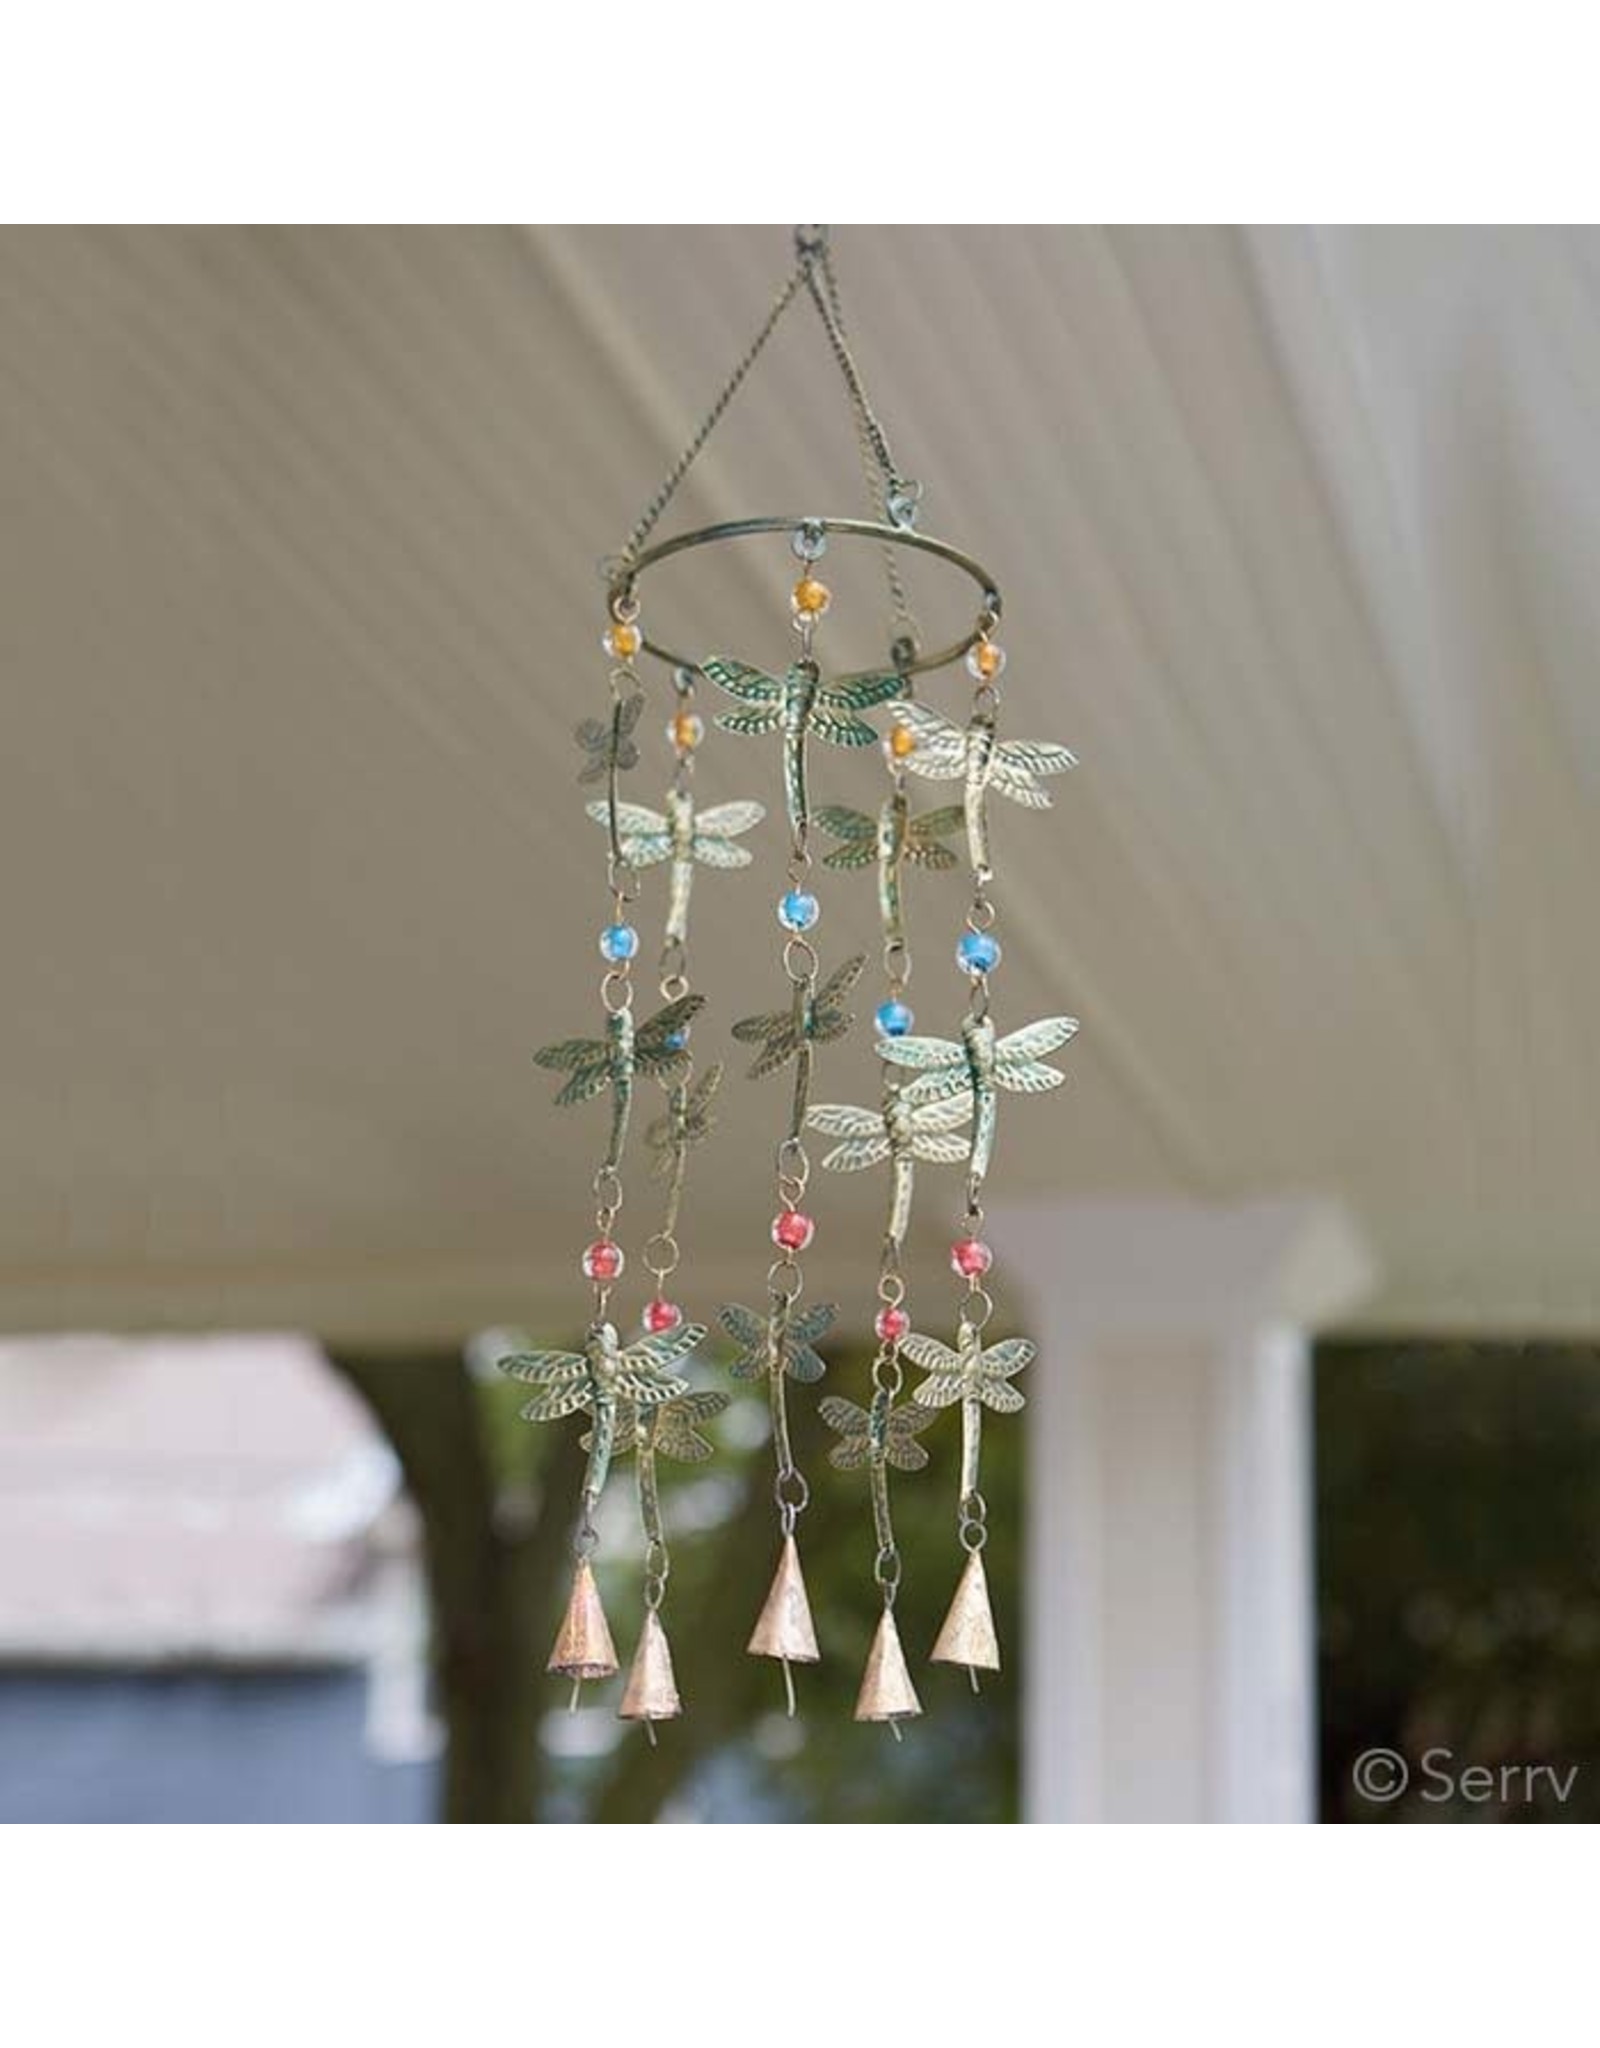 Dragonfly Carousel Wind Chime